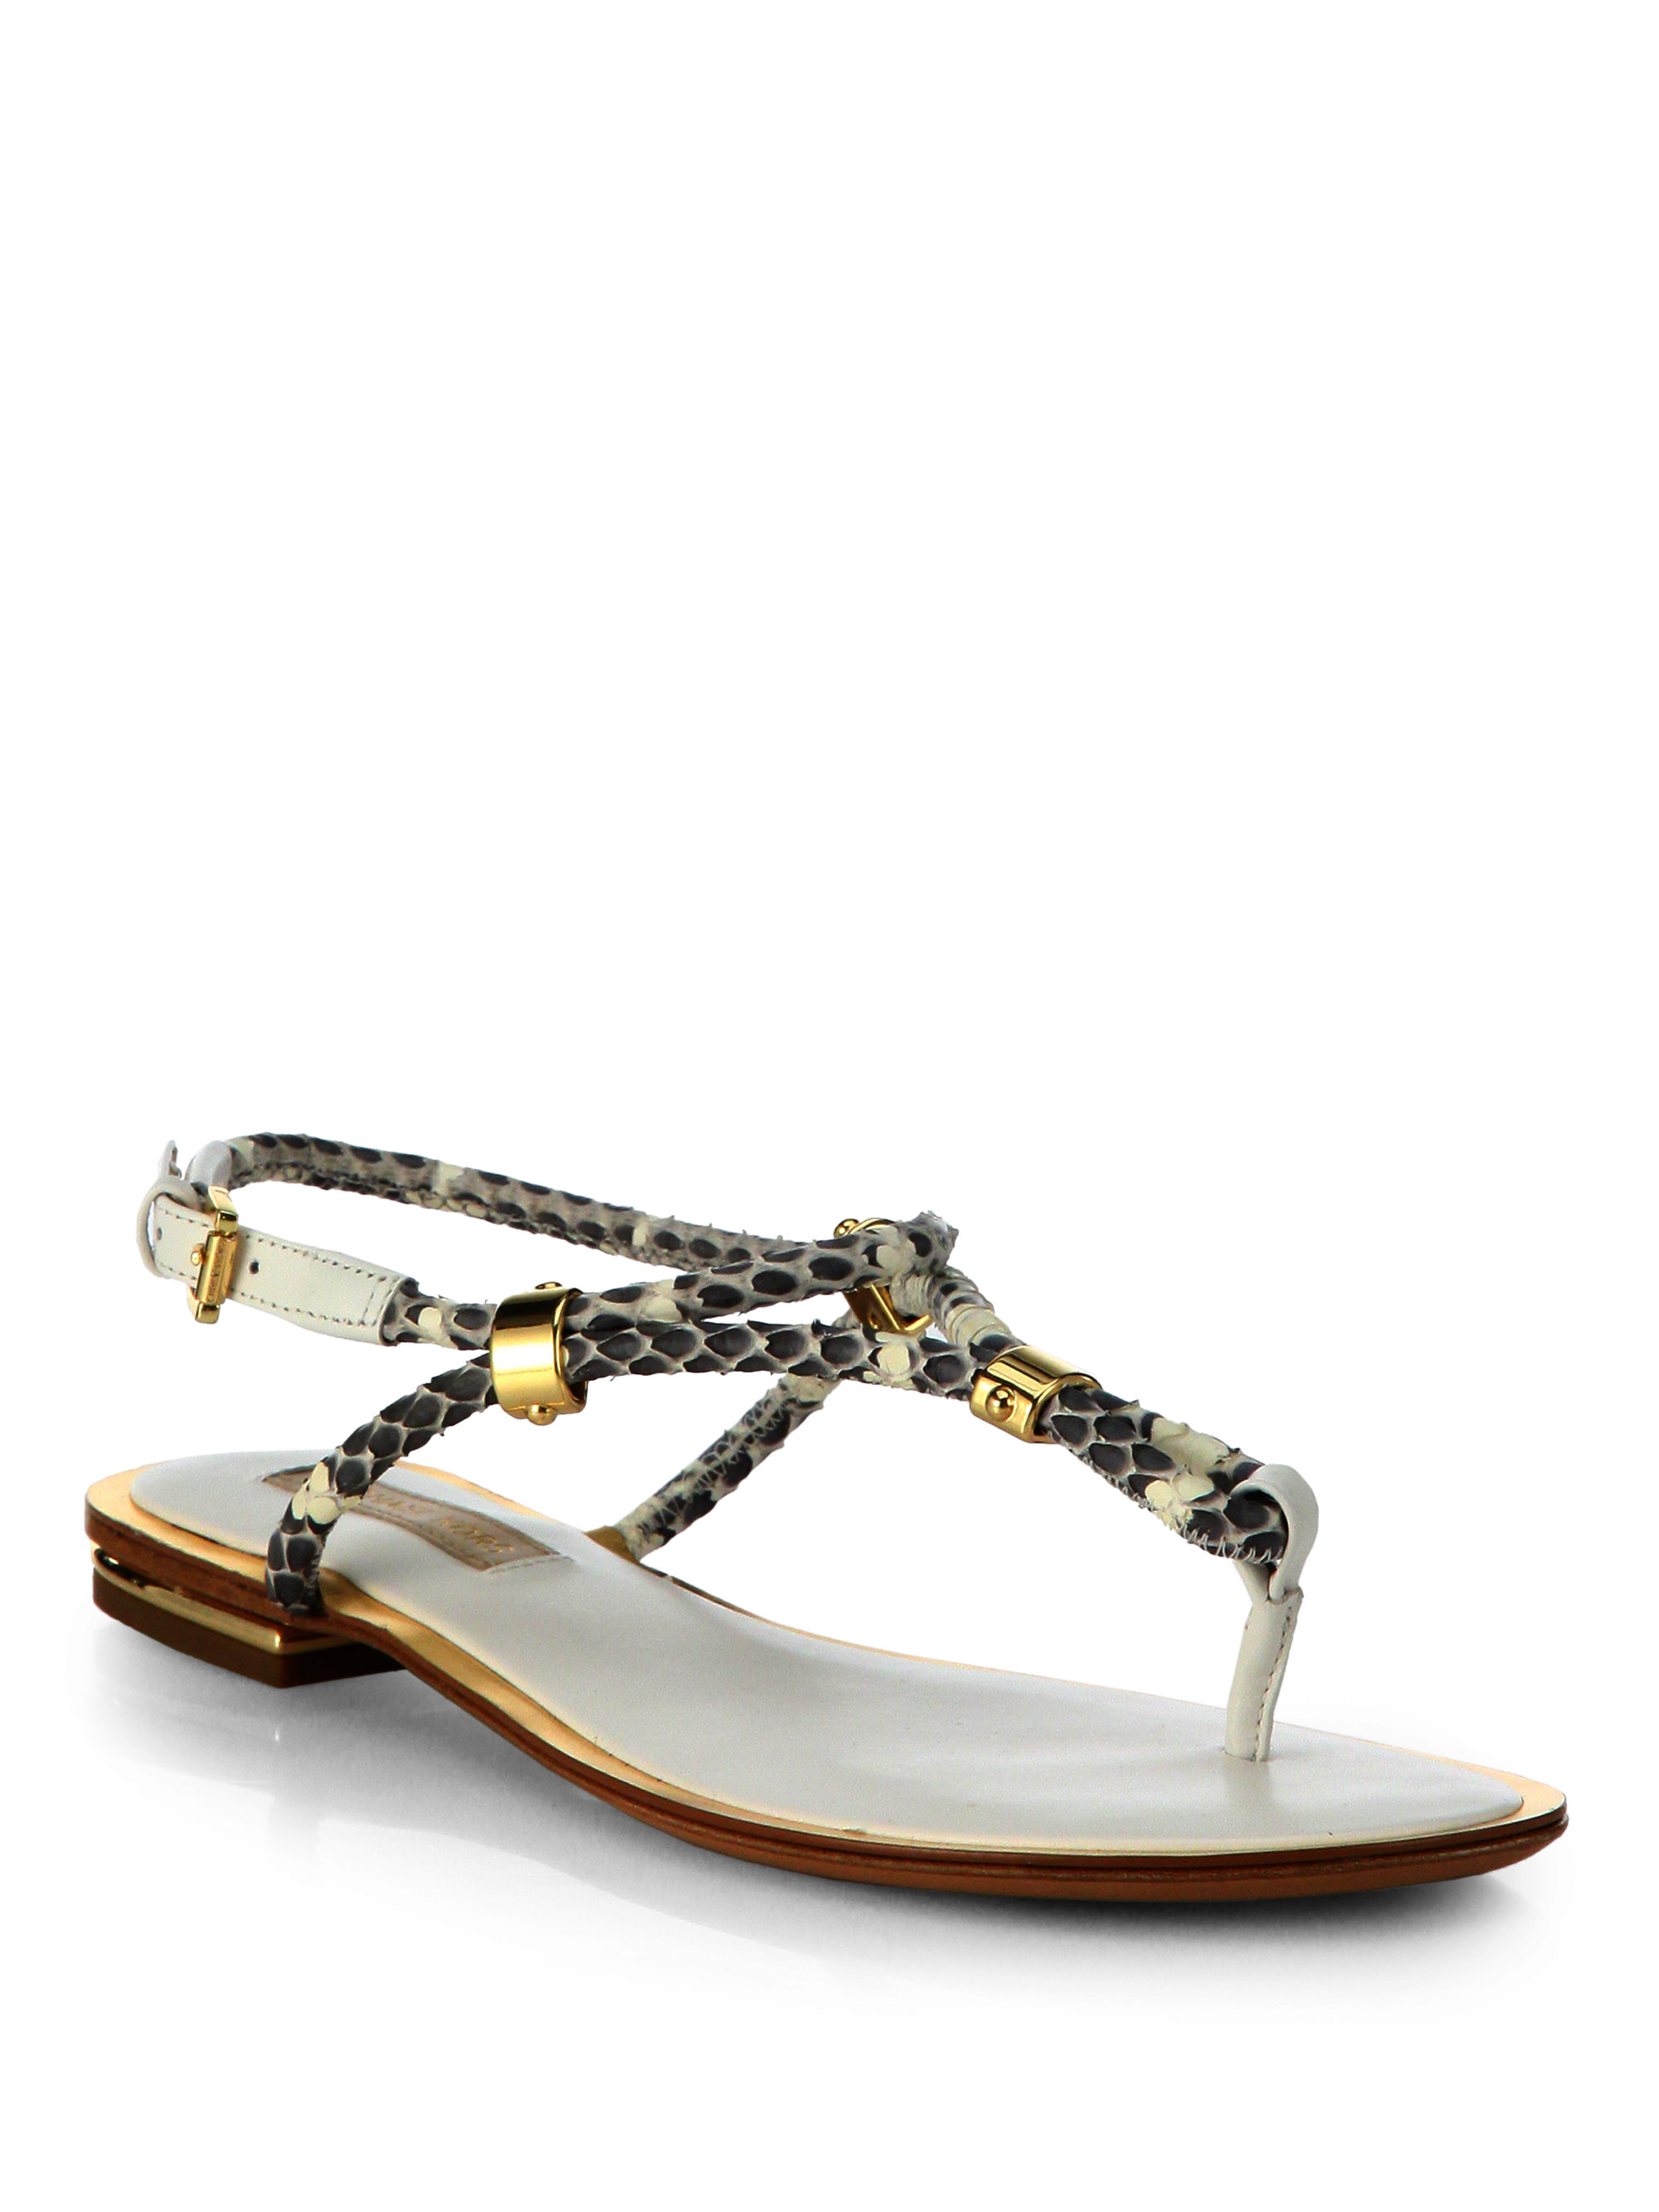 Michael Kors Hartley Snakeskin & Leather Thong Sandals in Animal ...